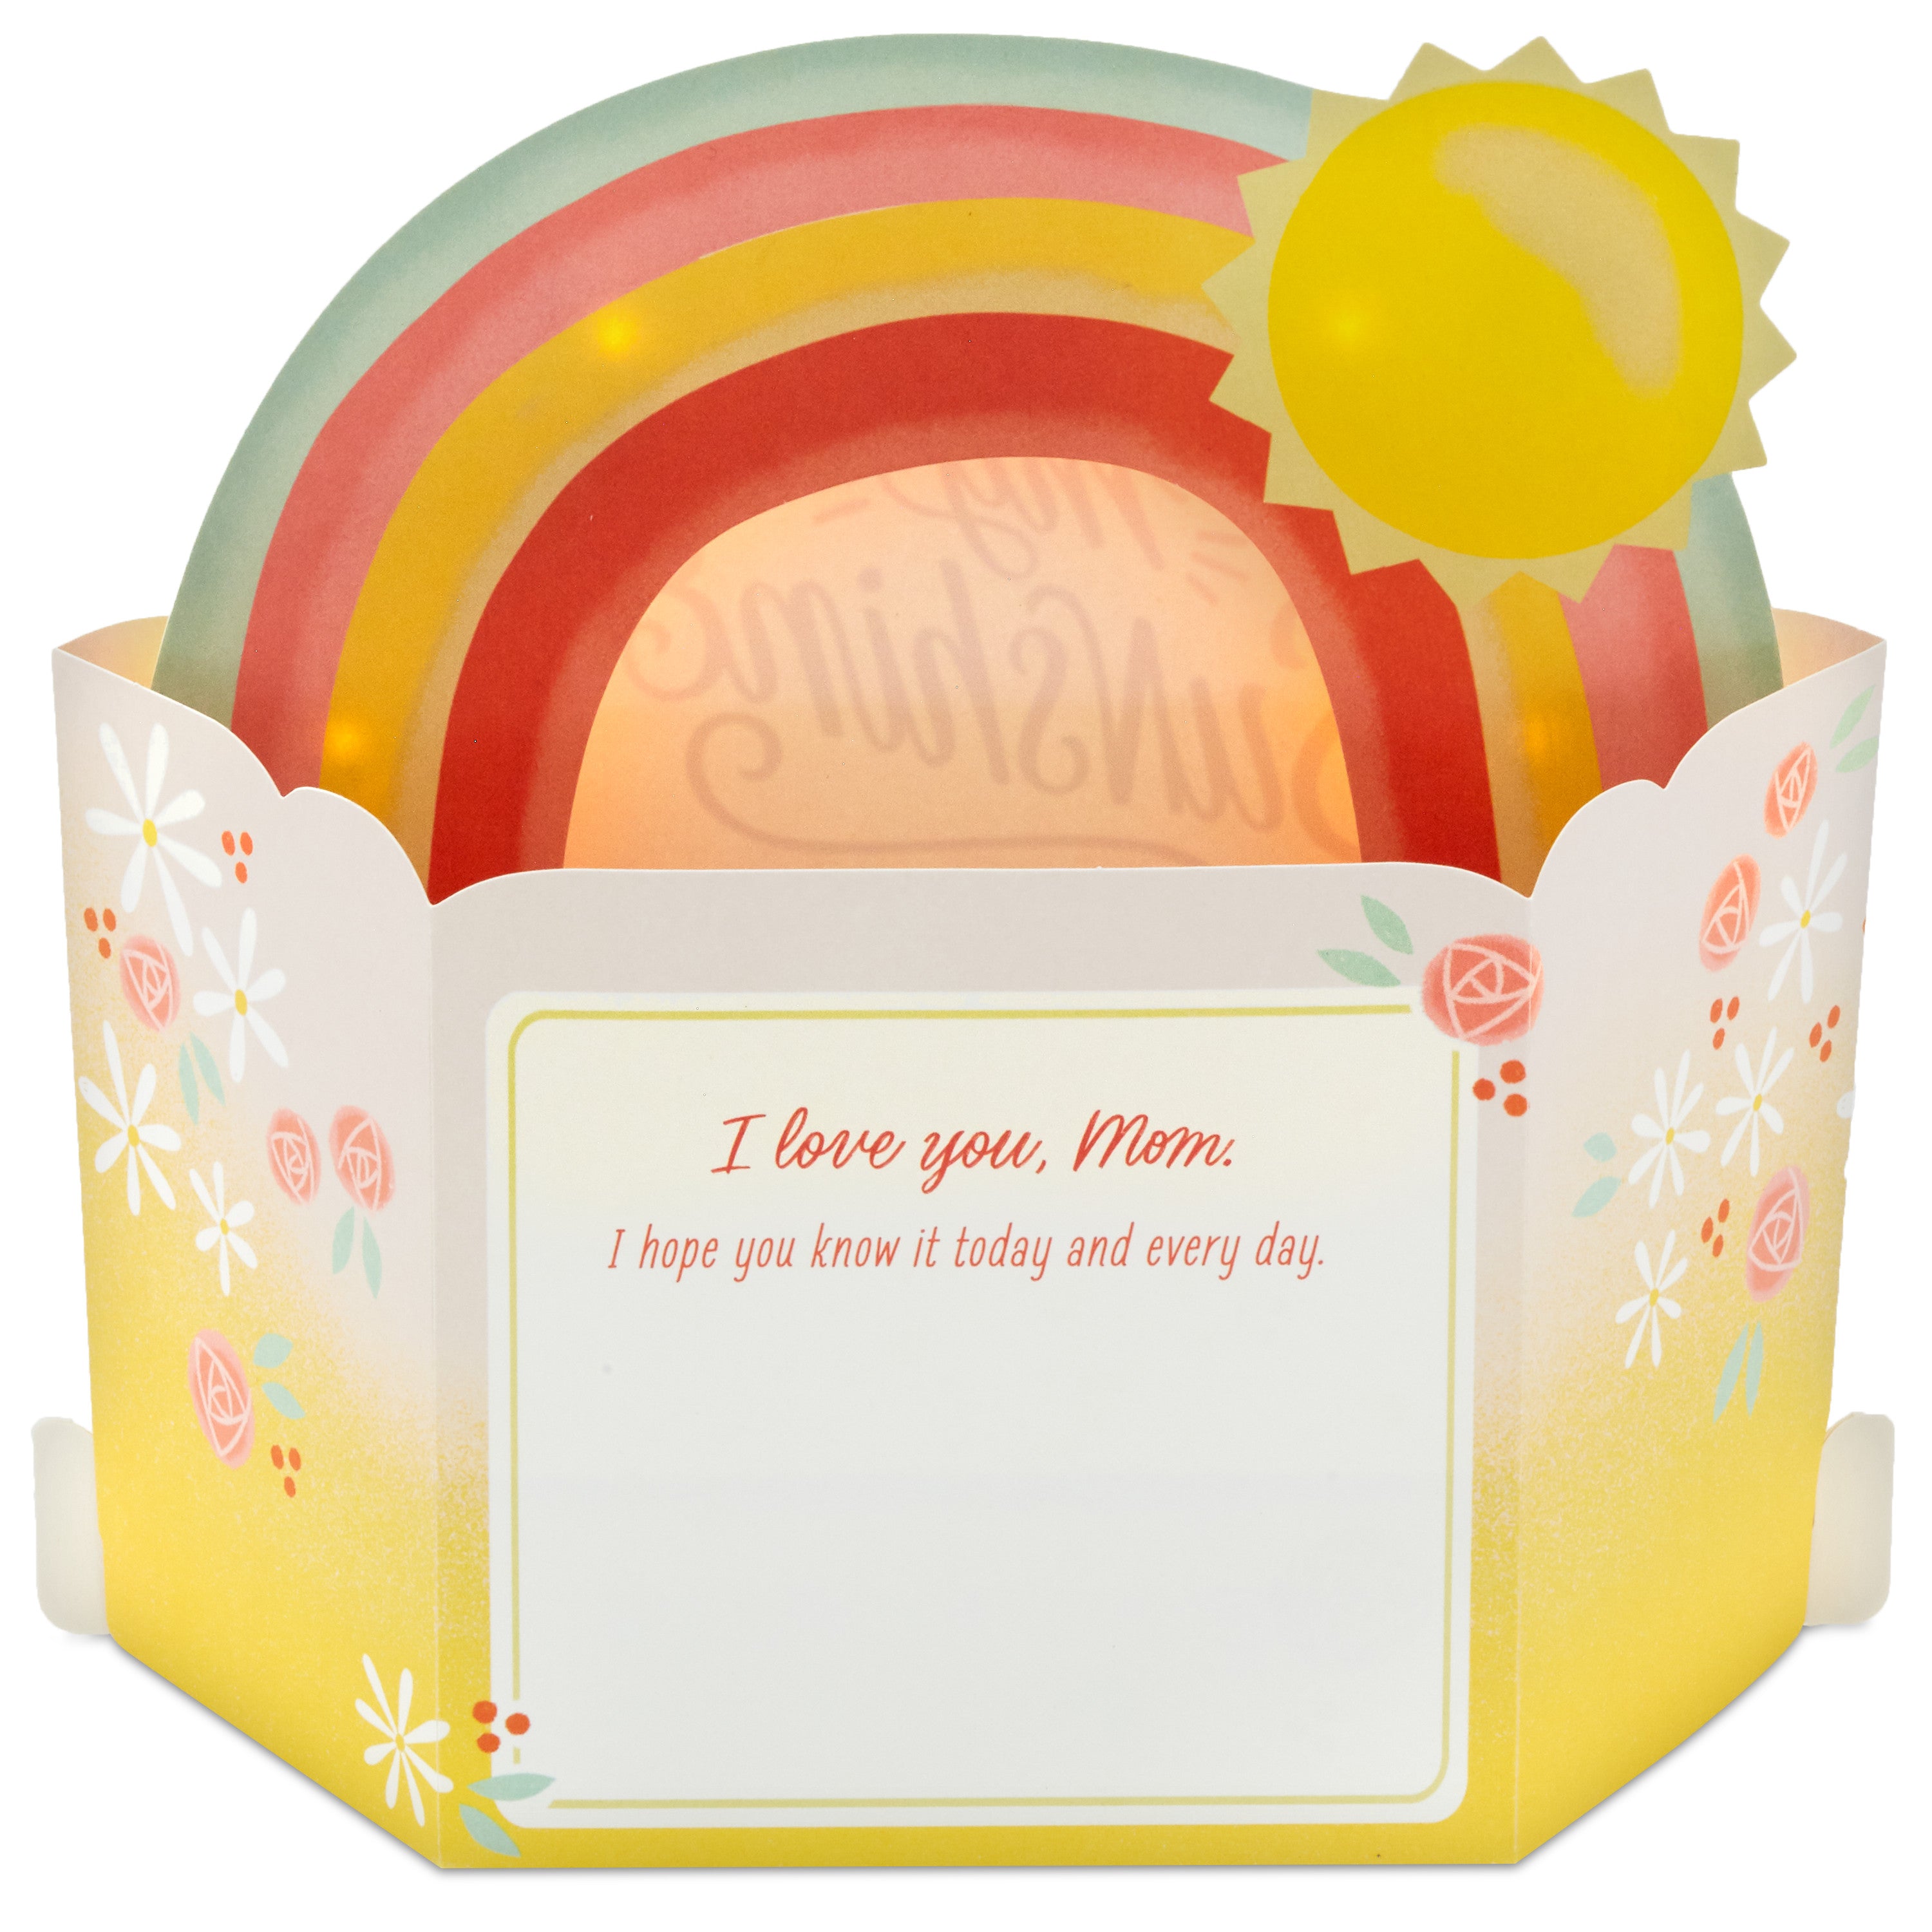 Paper Wonder Giant Birthday Pop Up Card for Mom with Light and Sound (Plays You Are My Sunshine)